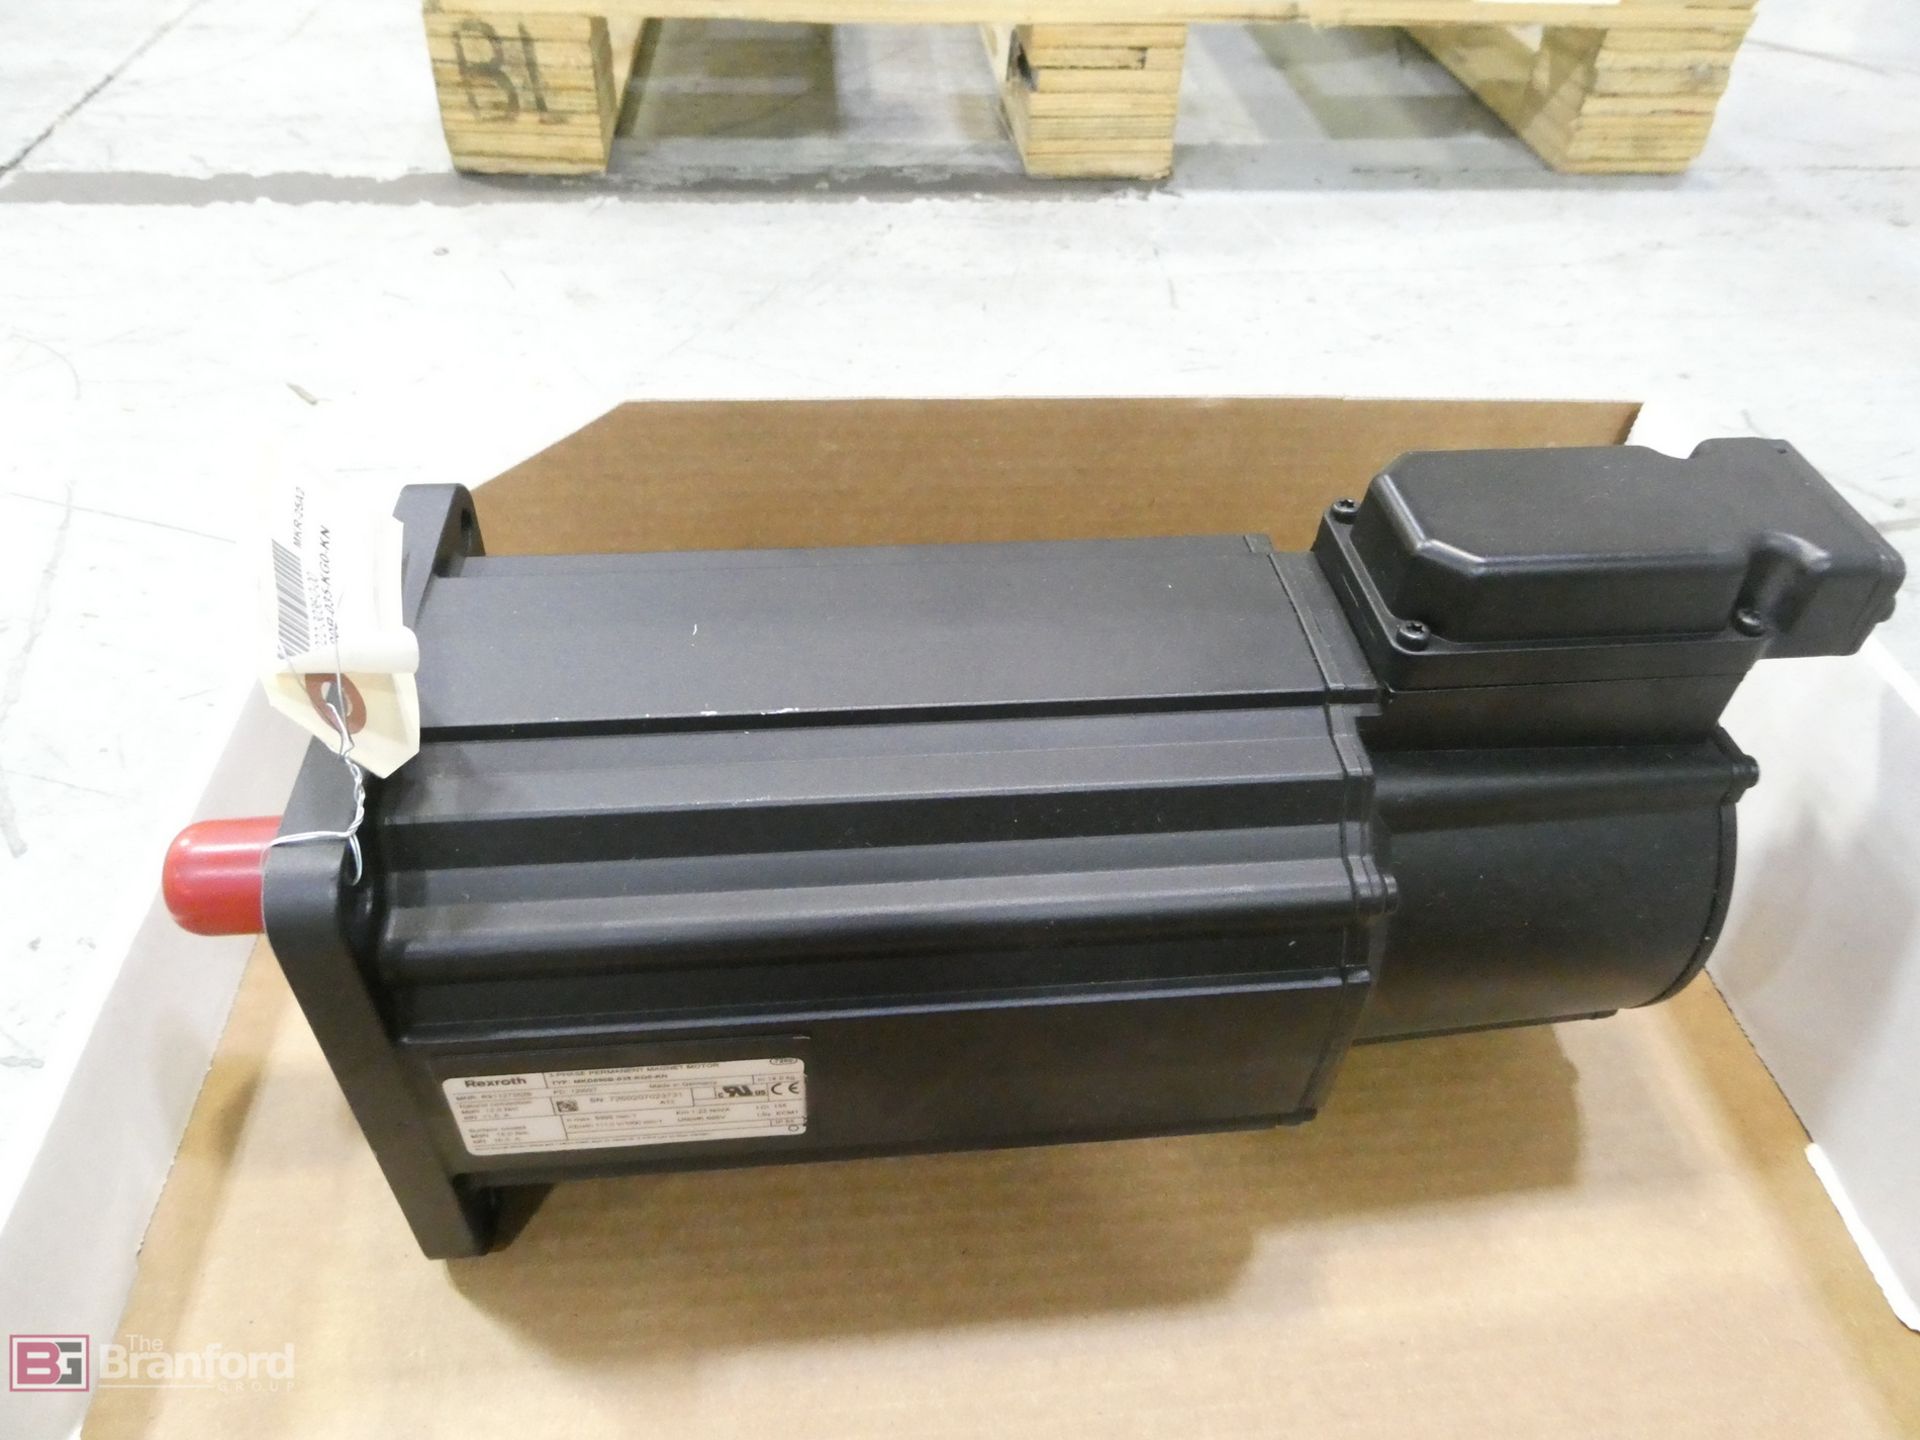 Rexroth Type MKD090B035KG0KN , Permanent Magnet 3-Phase PM-Motor - Image 2 of 3